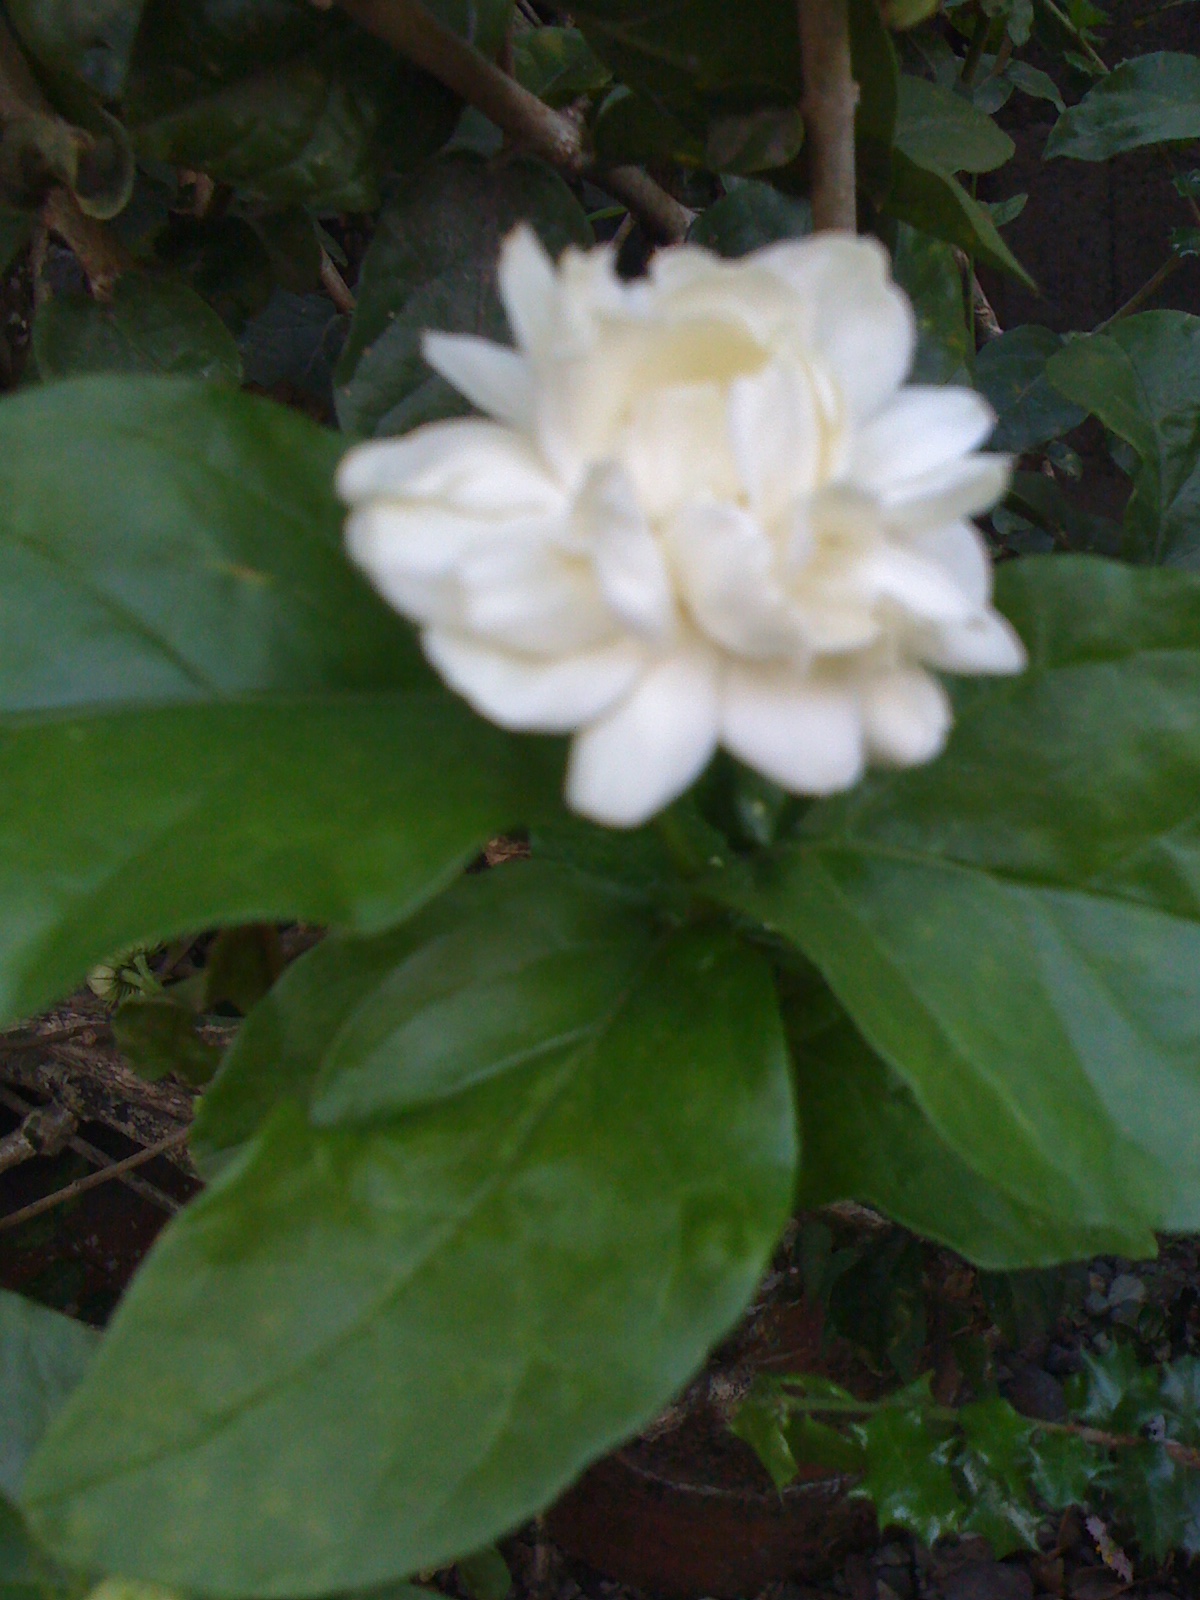 a sampaguita from our lawn